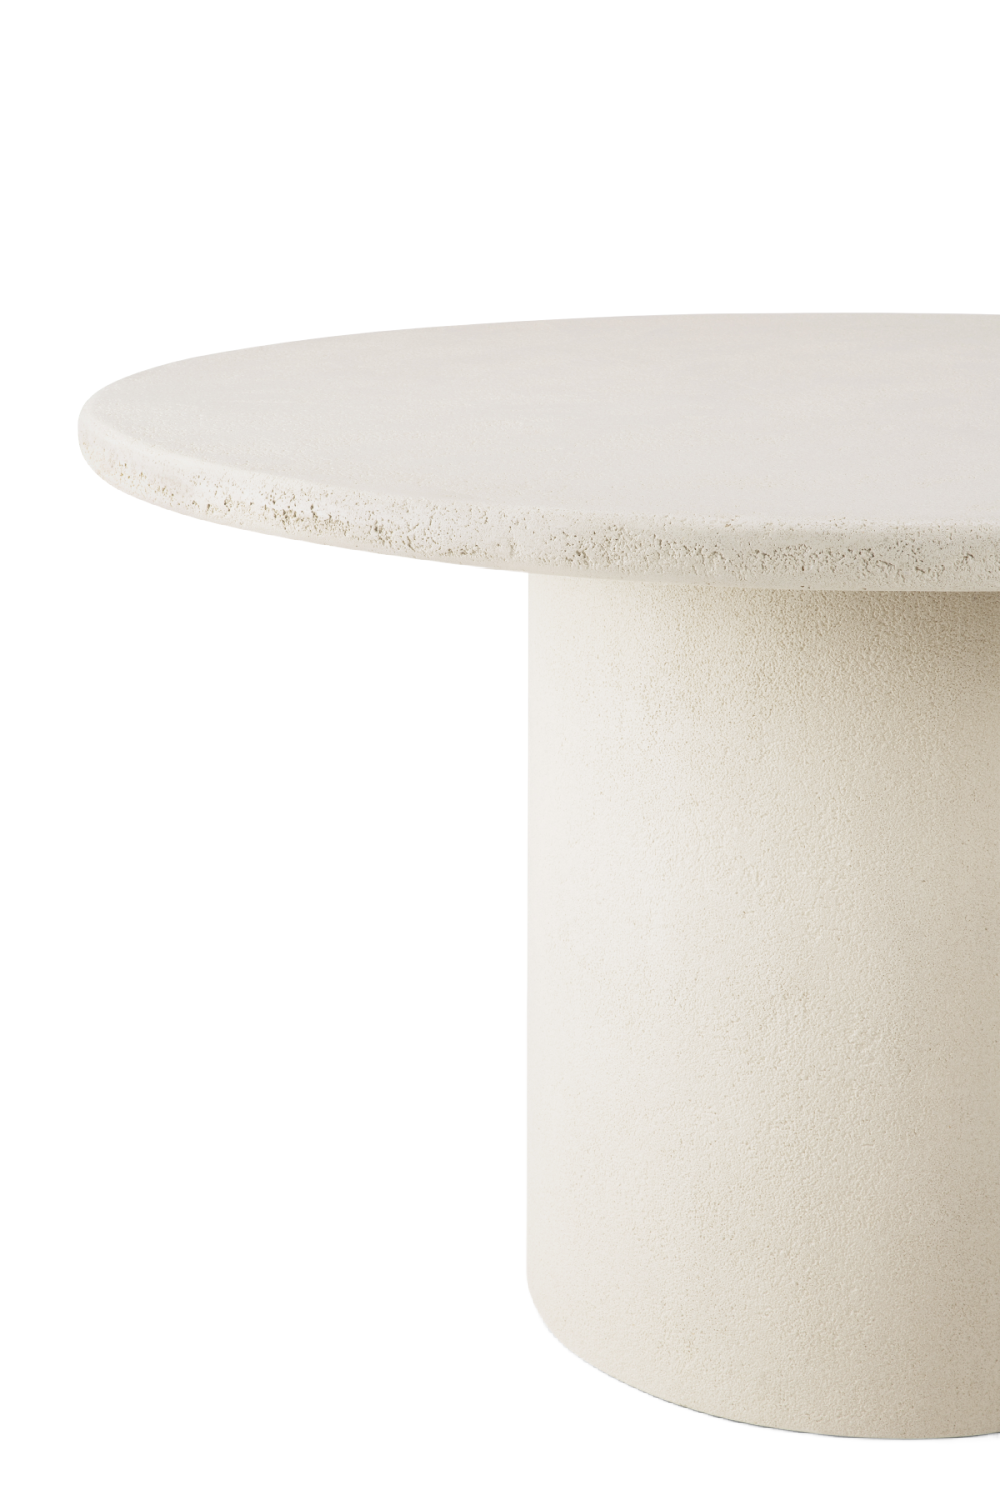 Round Pedestal Dining Table | Ethnicraft Elements | Oroa.com